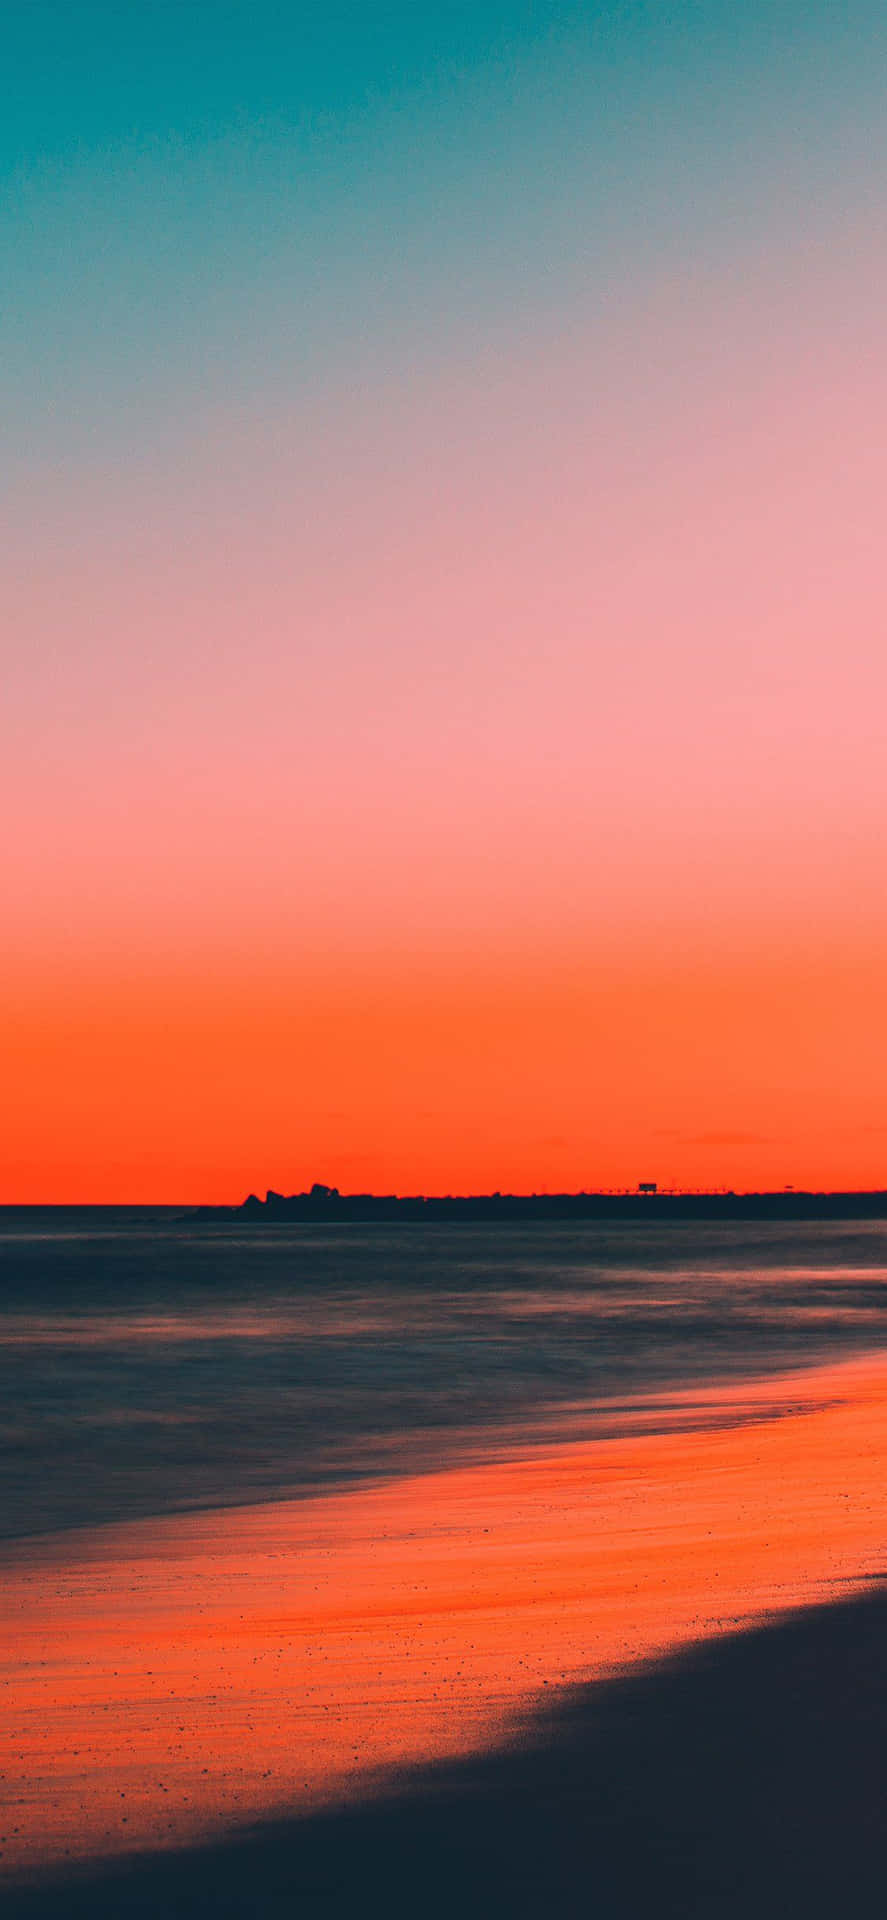 "Experience the serenity of a sunset beach view with your iPhone" Wallpaper